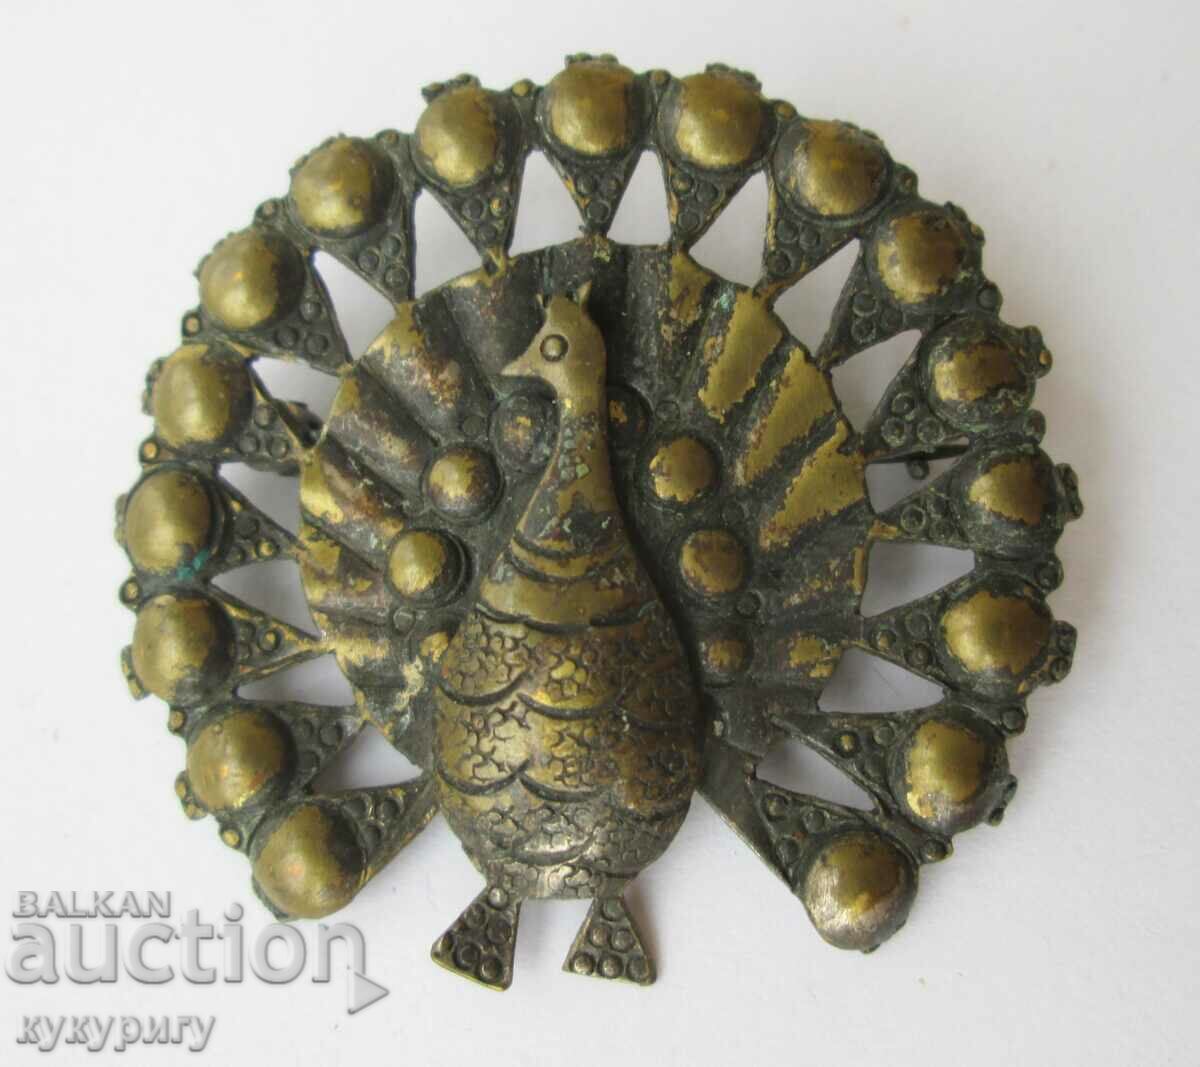 Old lady's brooch in the shape of a peacock